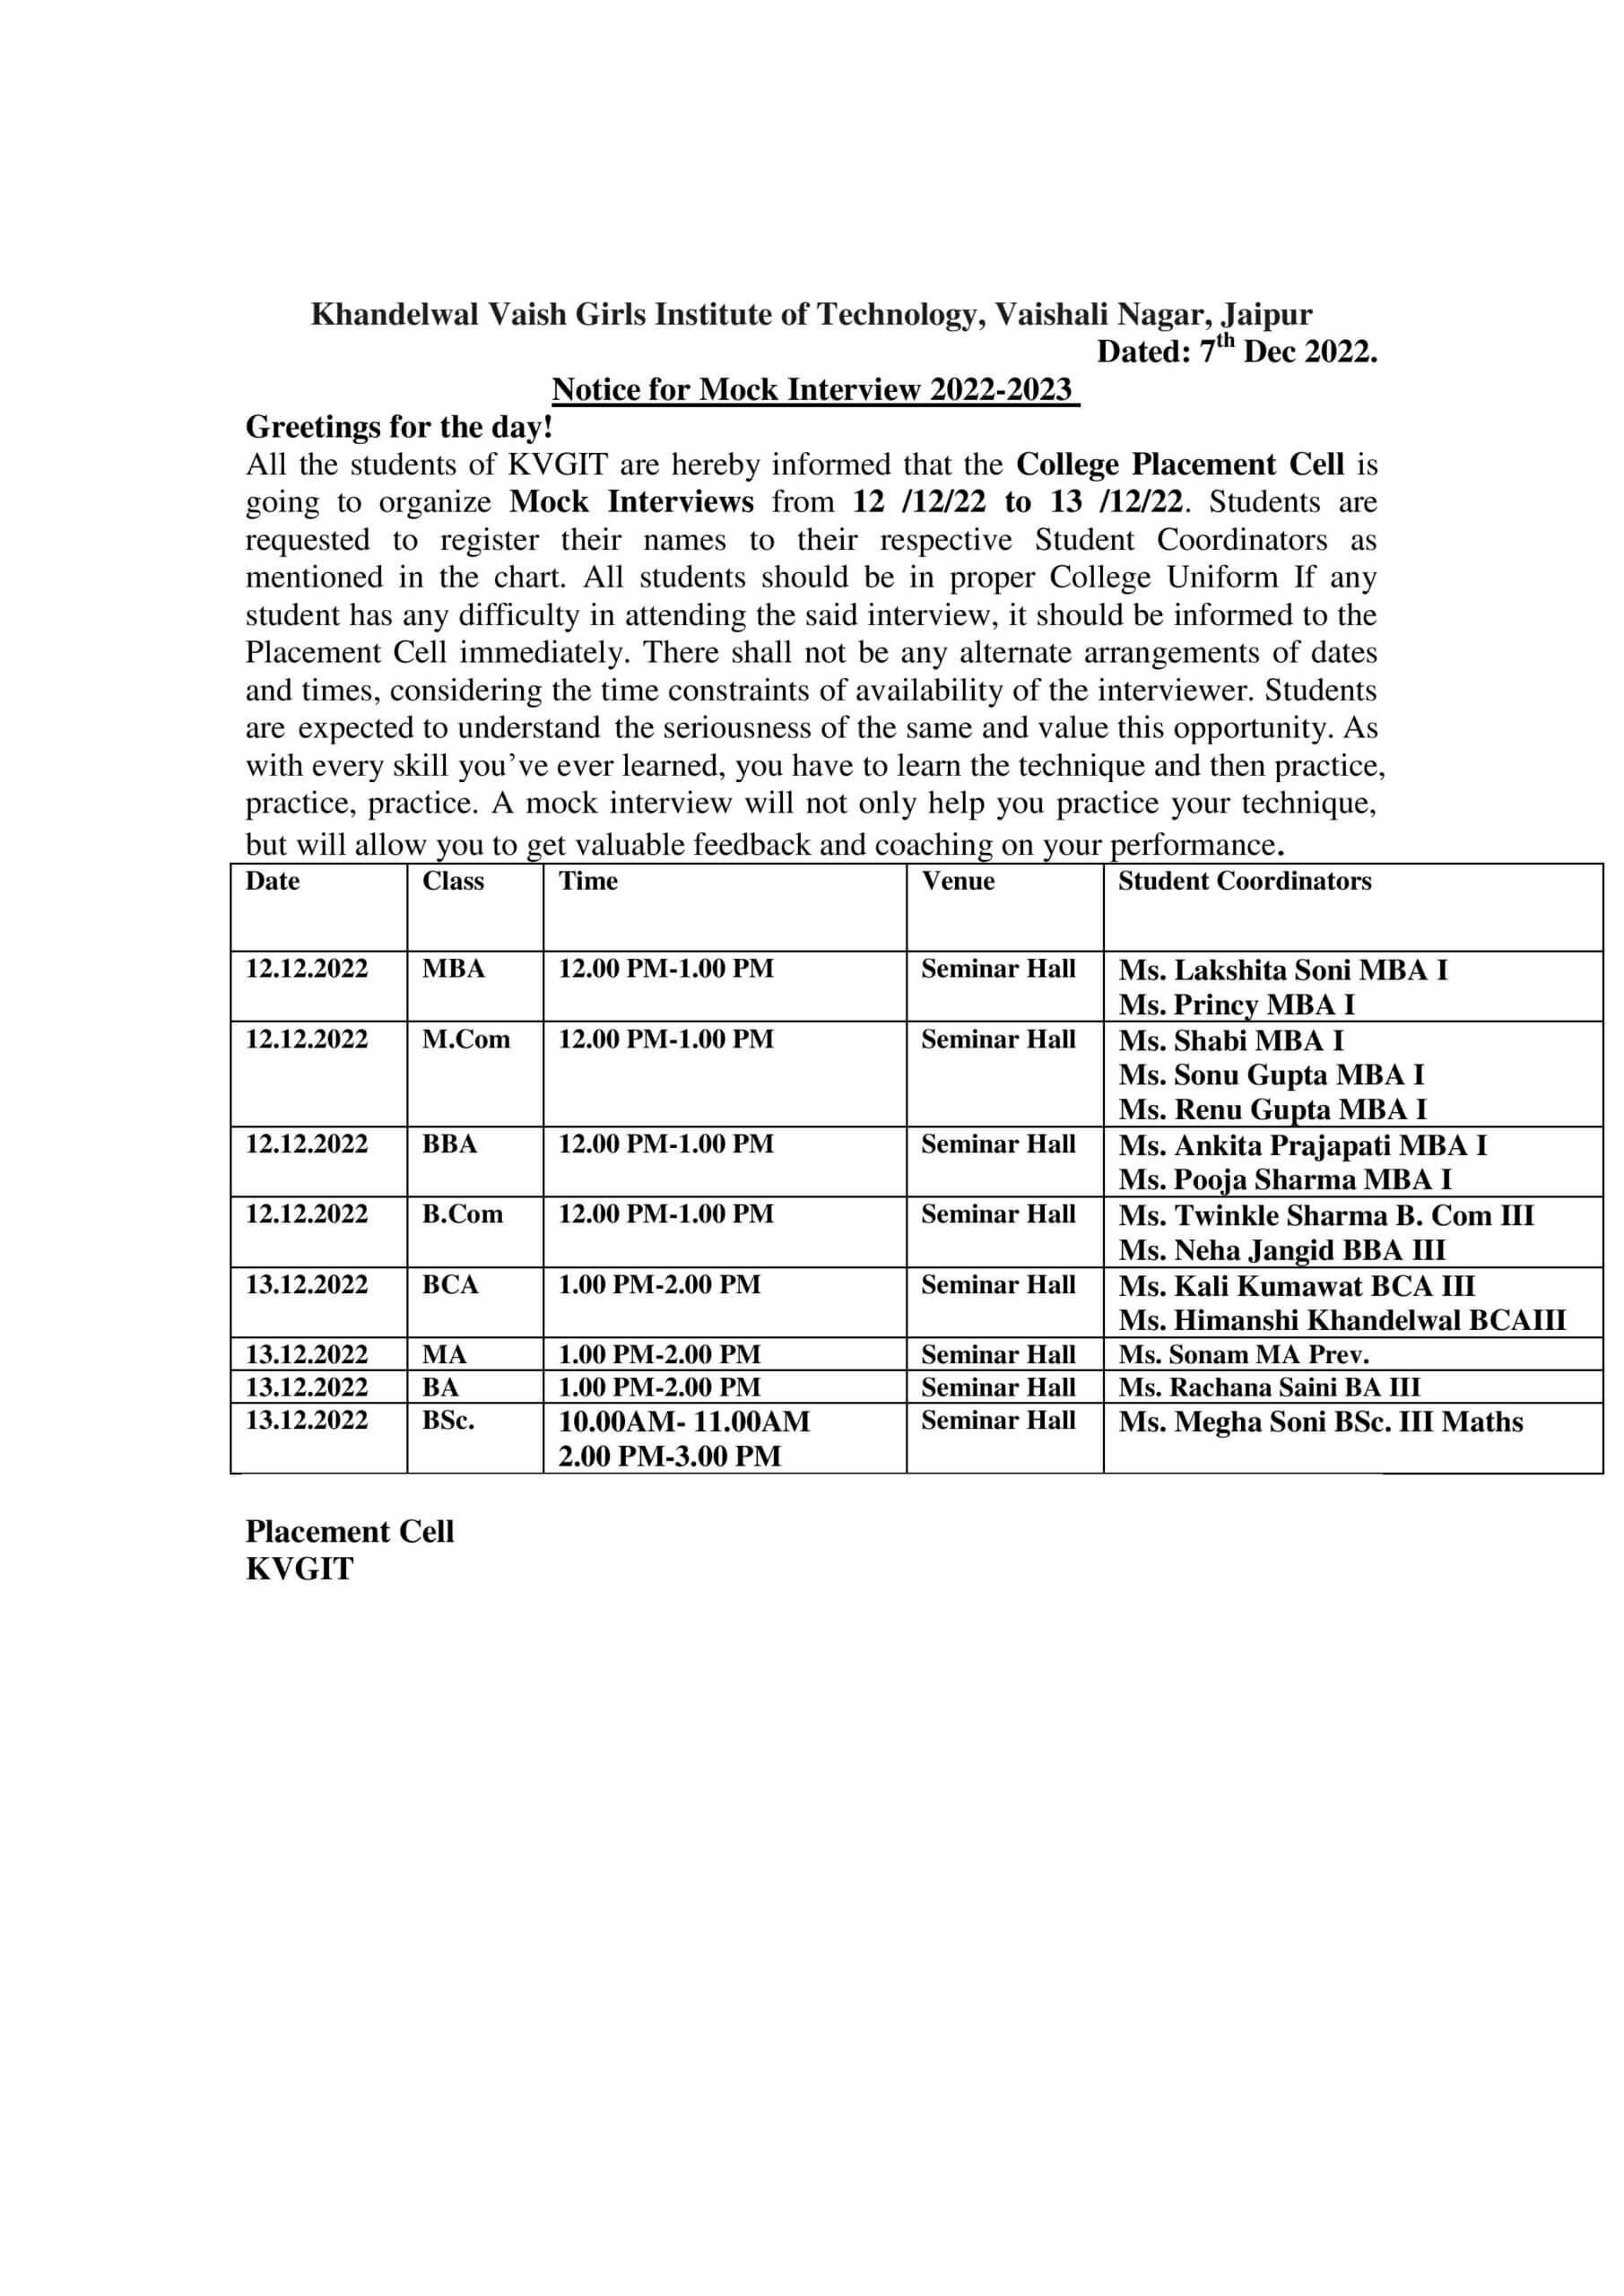 Notice for Mock Interview 2022-2023